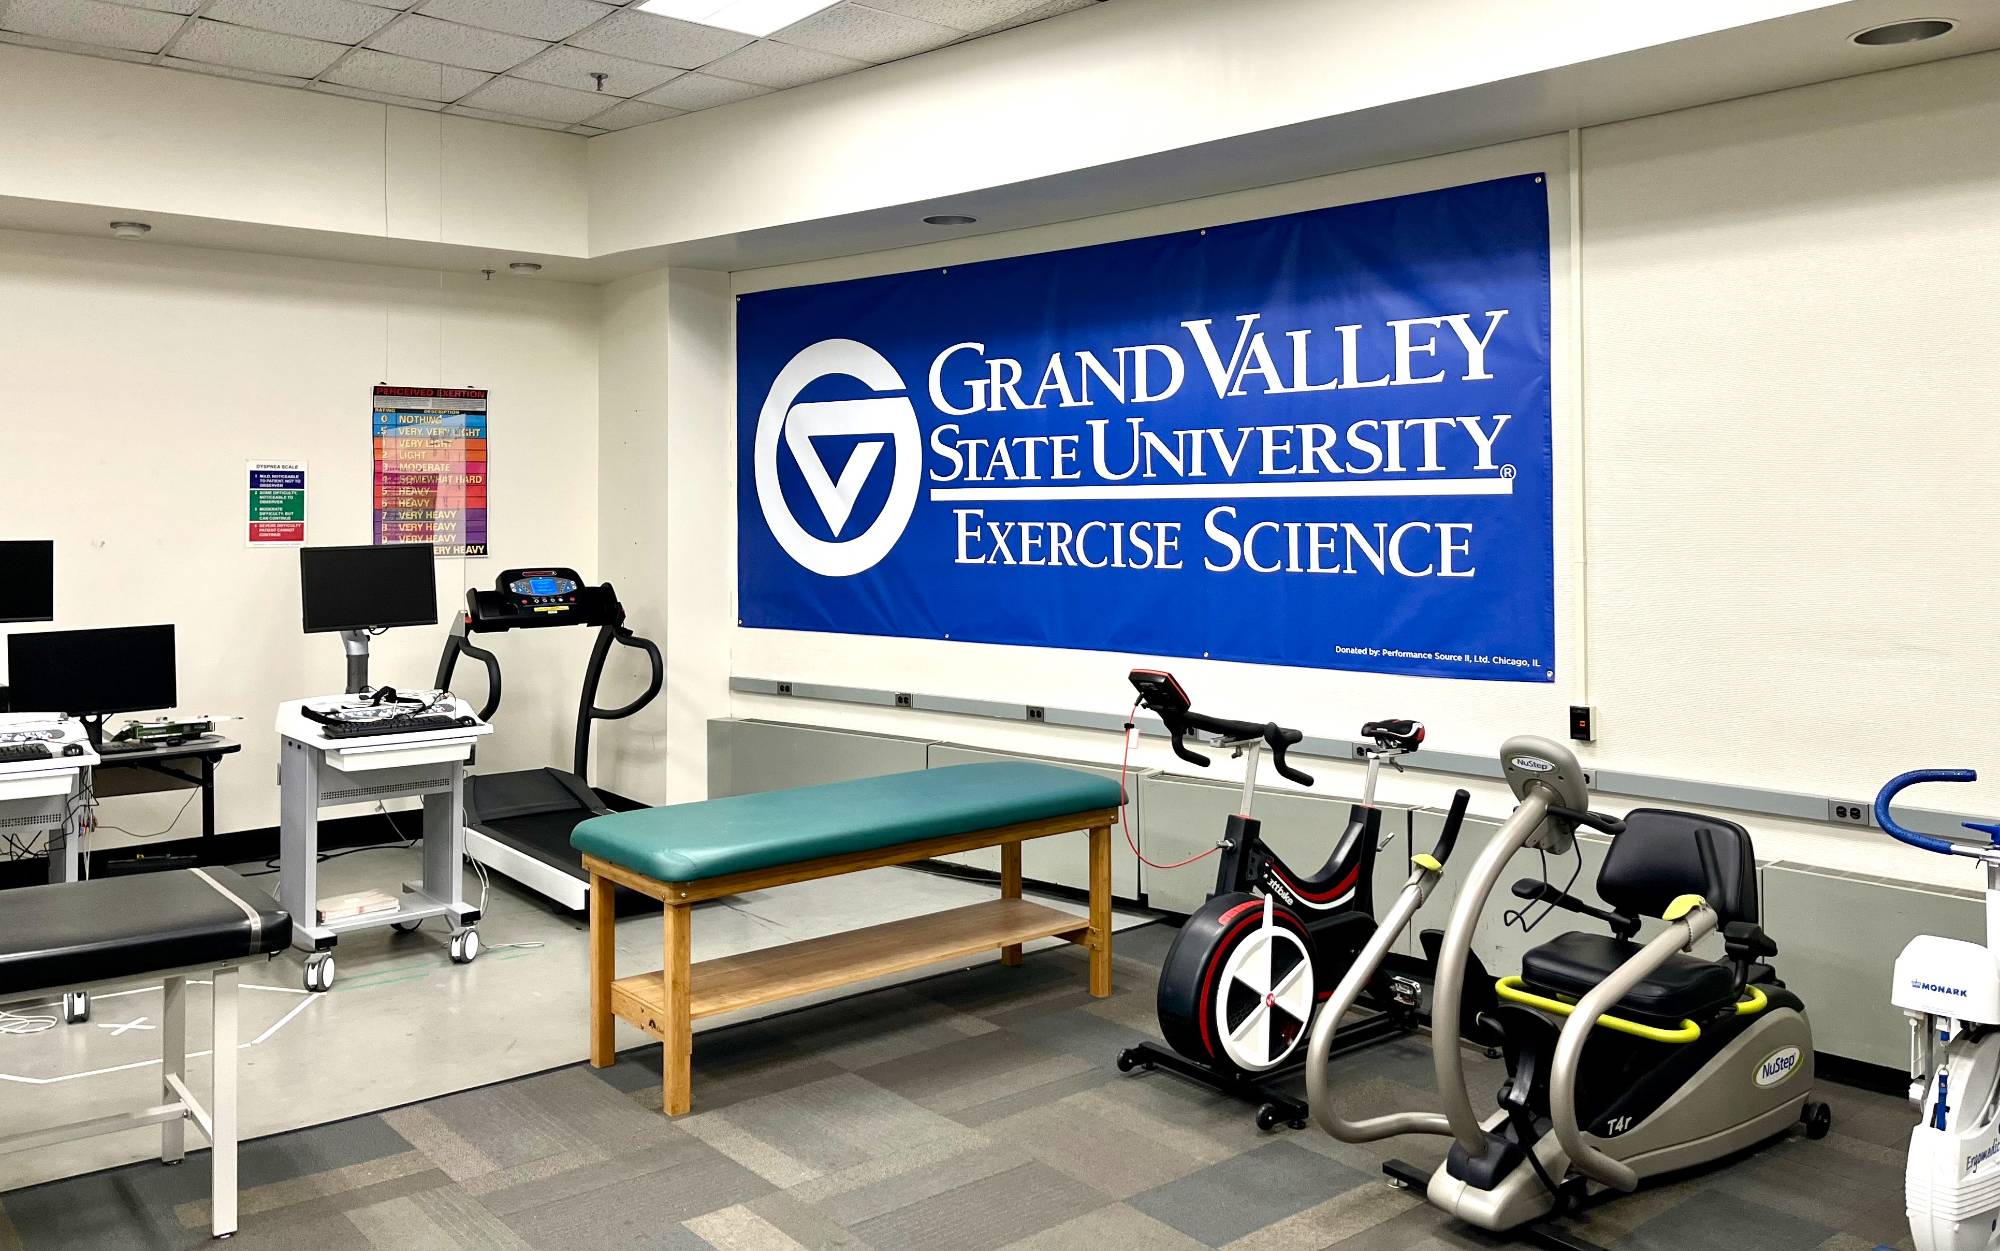 Image of exercise science banner and lab